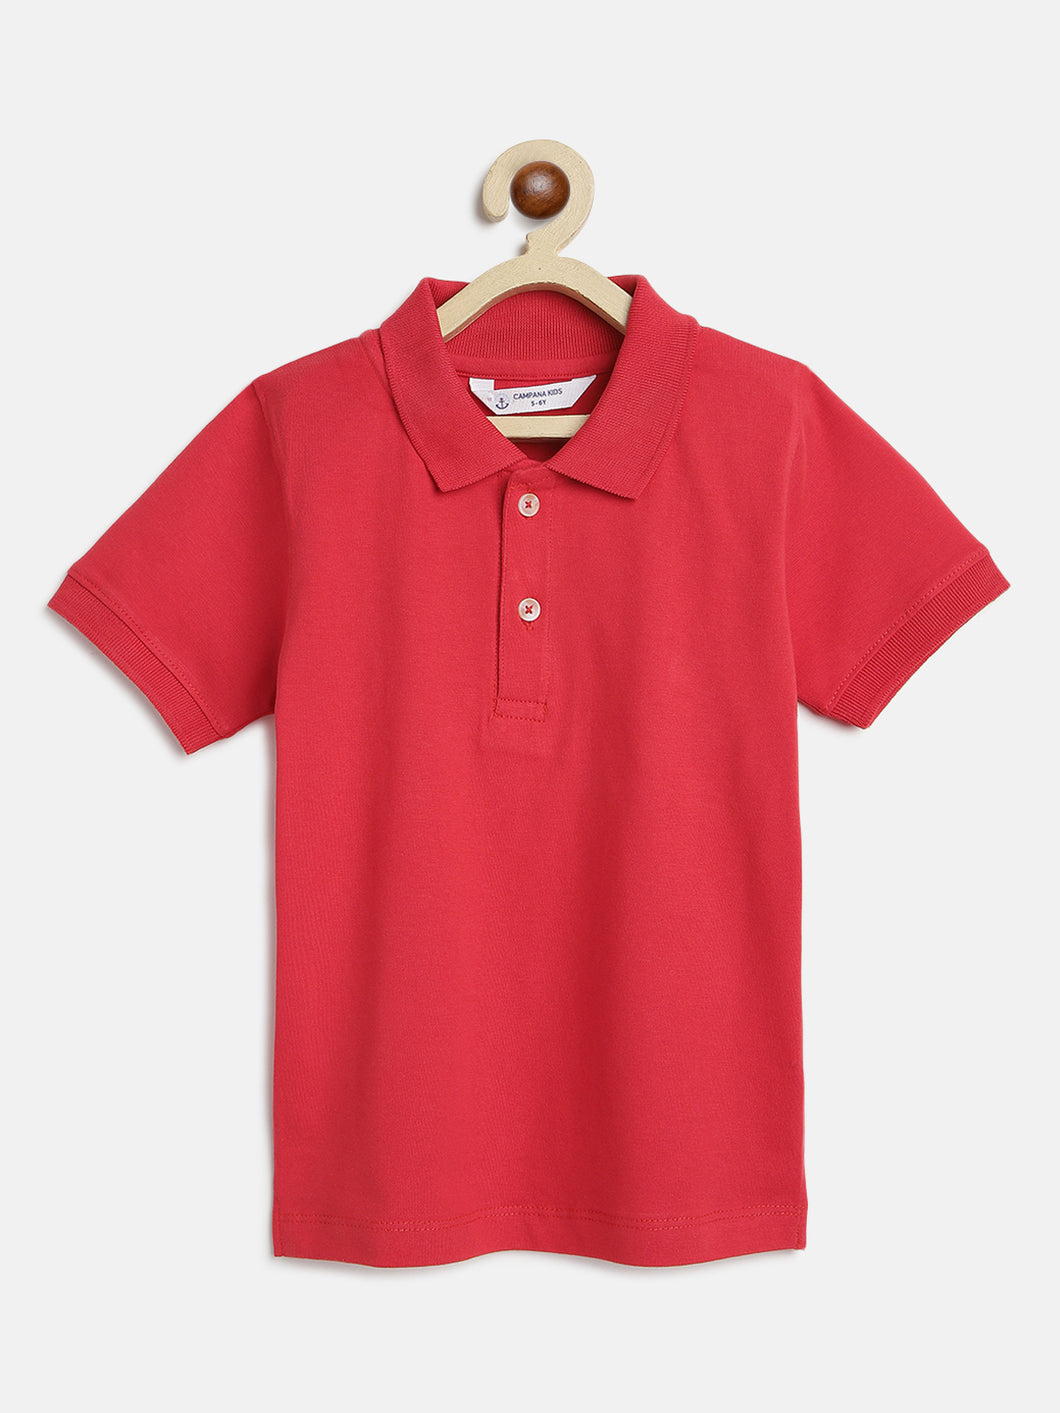 Campana Boys Niko 100% Cotton Jersey Half Sleeves Solid Polo T-Shirt - Red